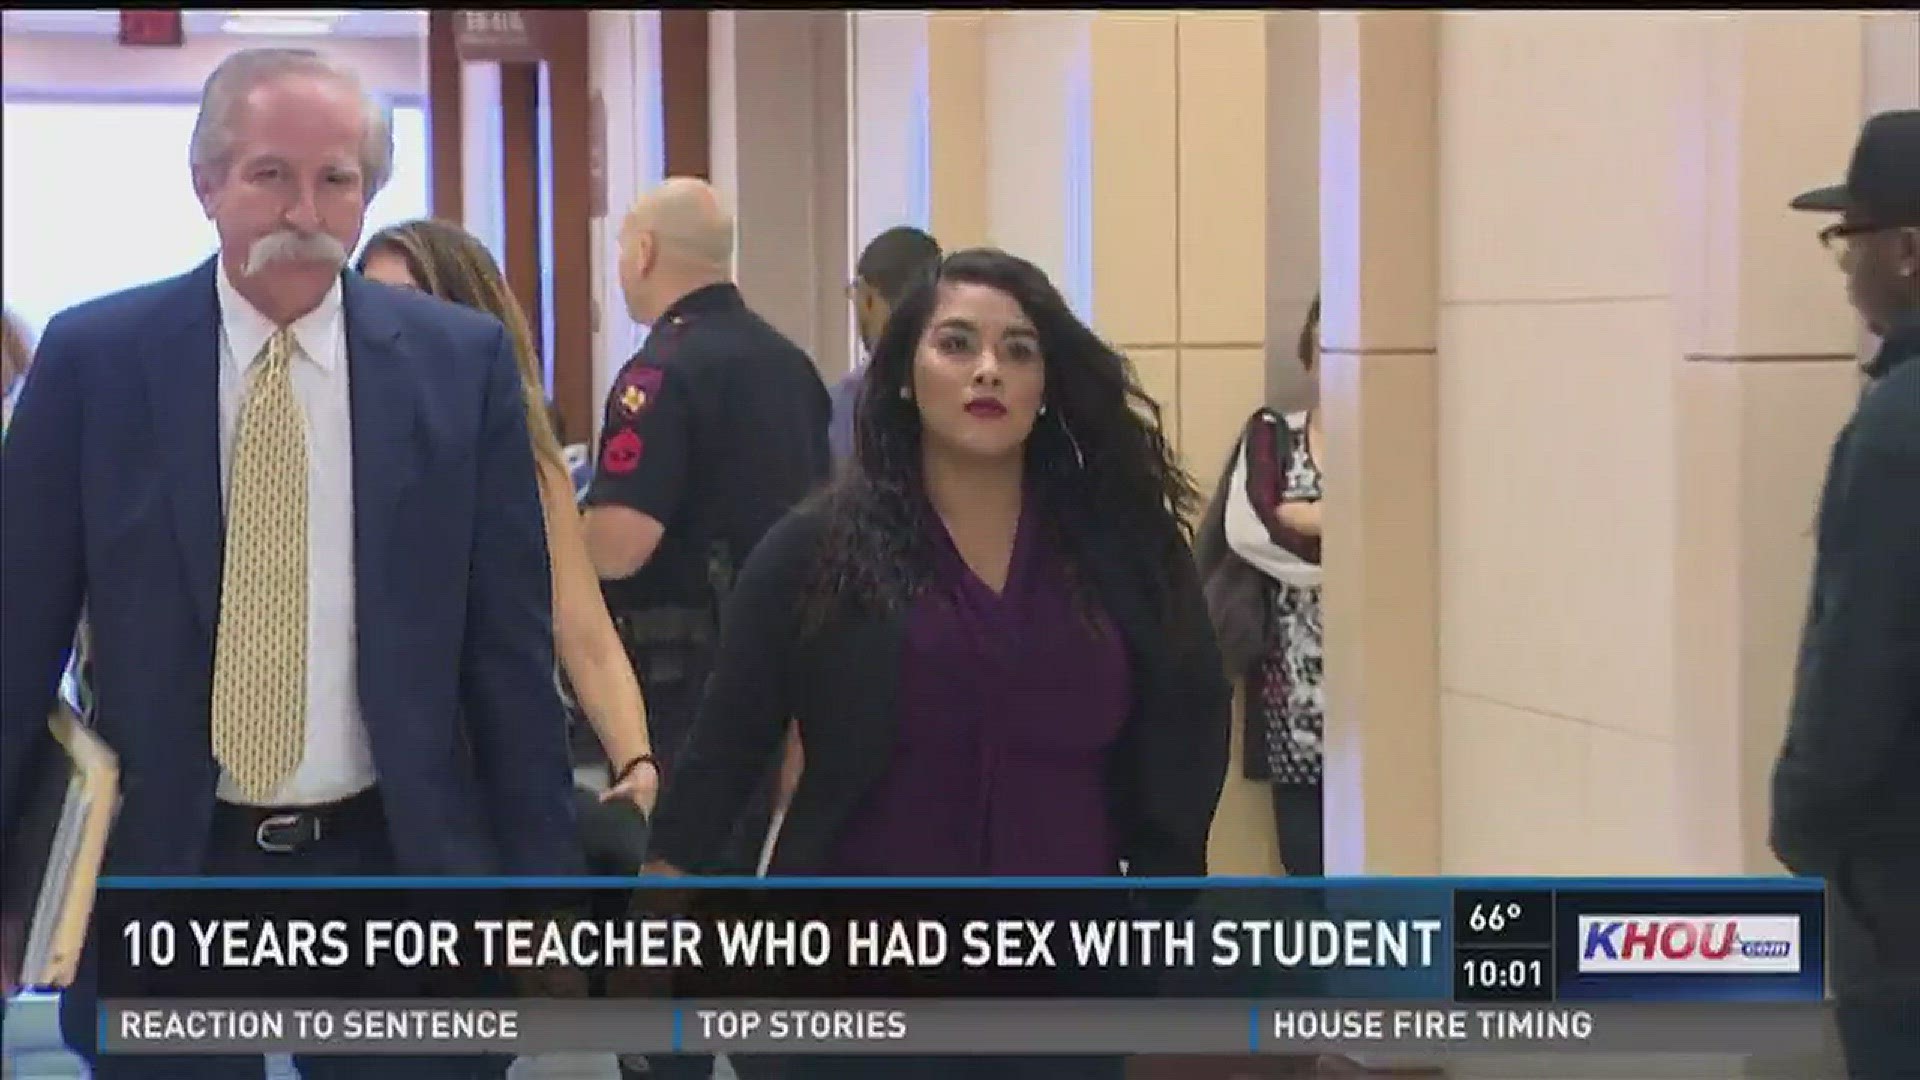 A former Harris County teacher will spend the next ten years in prison for having sex with her 13 year old student. The judge says hopefully the sentence will send a message to other teachers to keep their hands off of students.